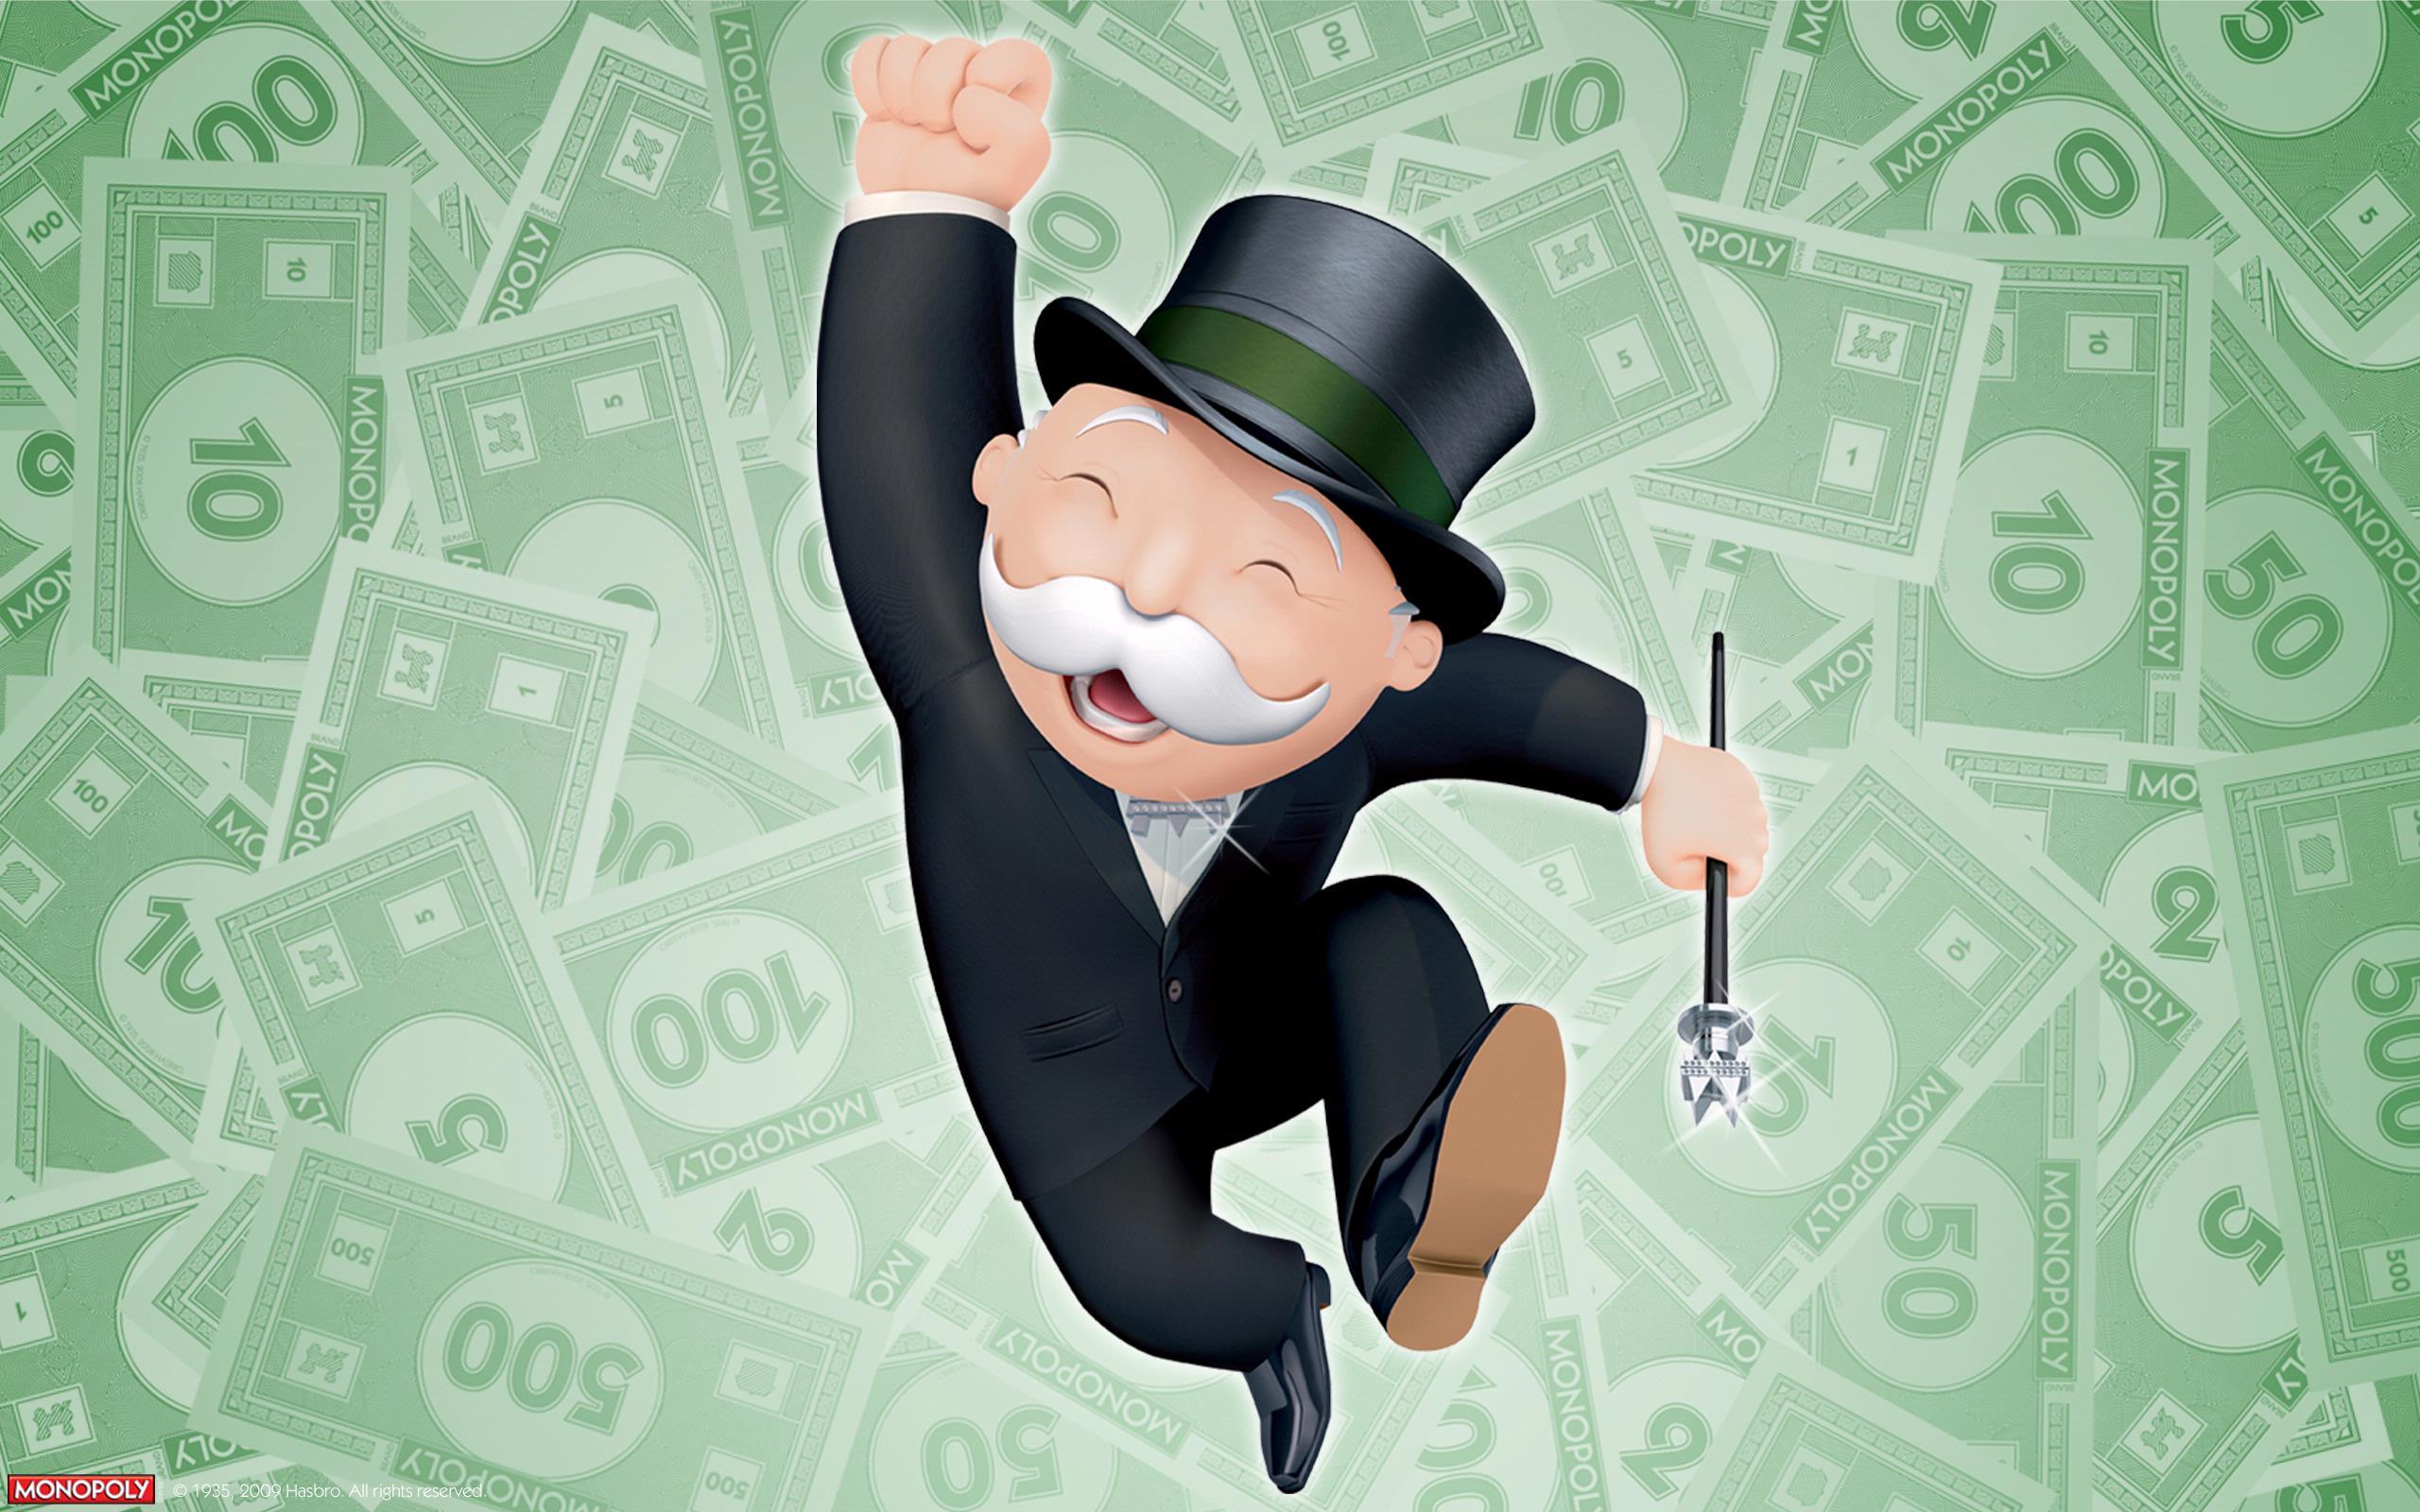 Monopoly HD Wallpaper and Background Image